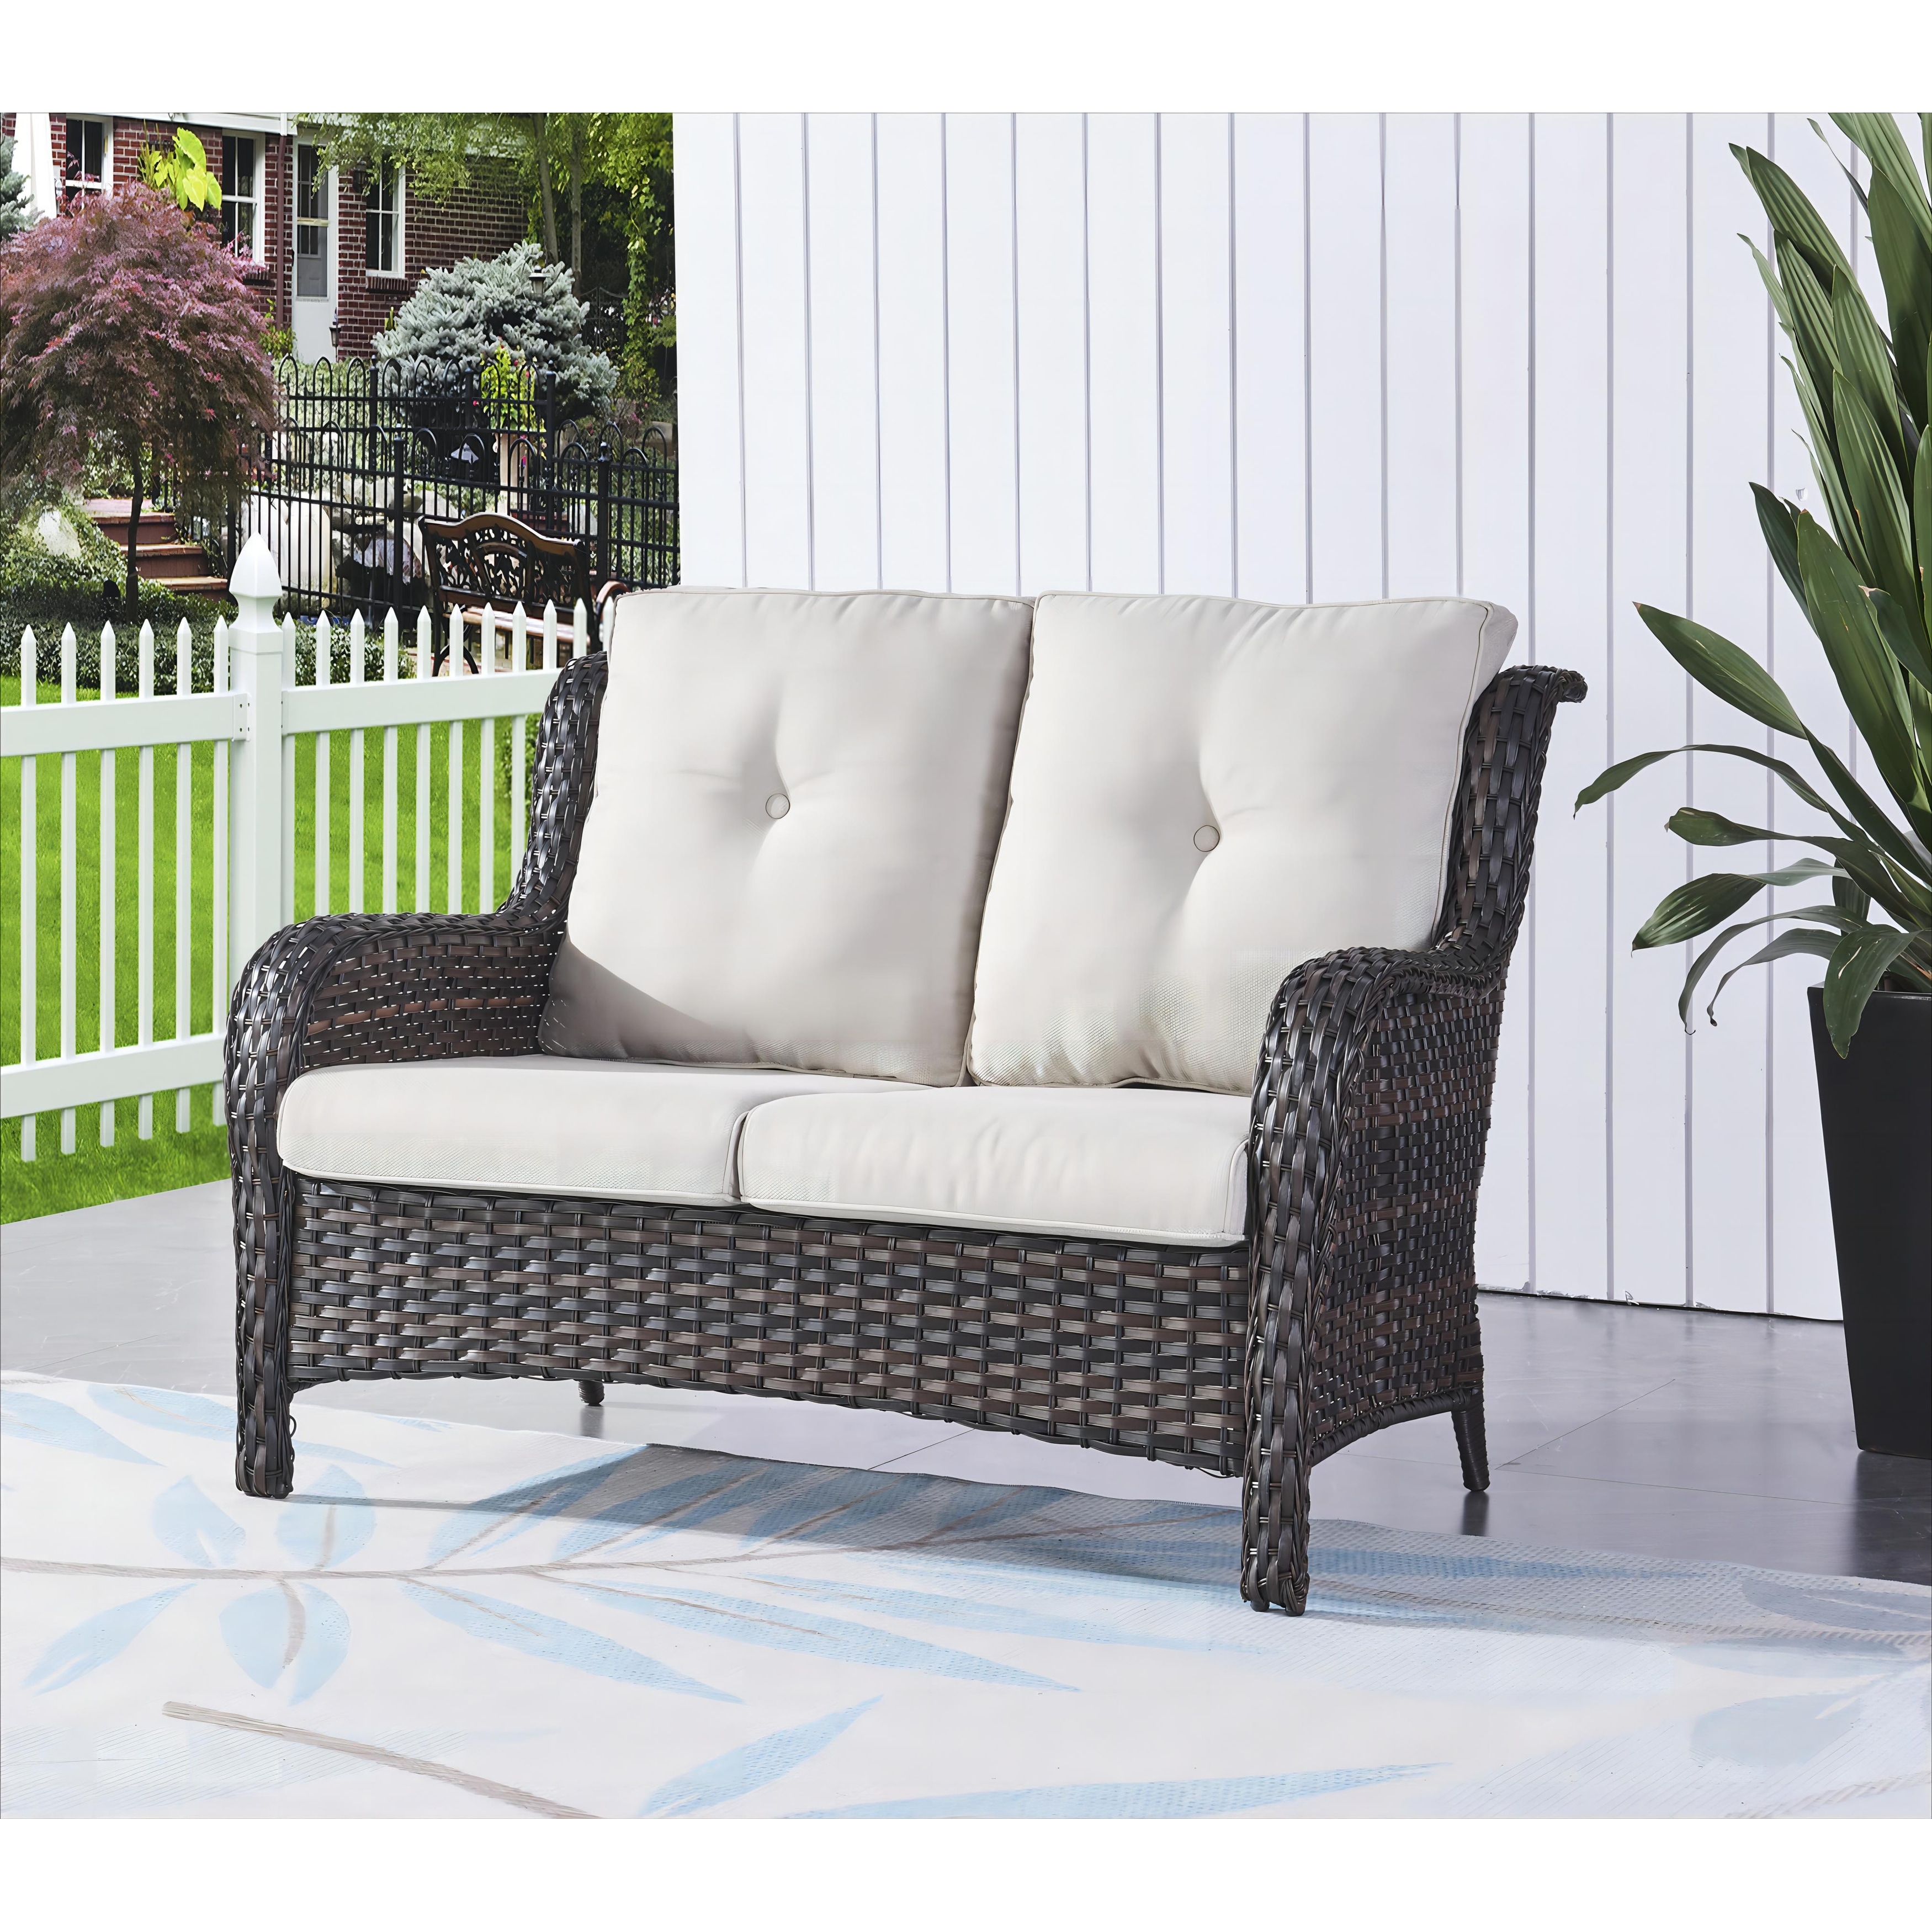 Pocassy Outdoor Patio Loveseat Sofa, Wide and Deep Seating Brown/Beige - image 3 of 5